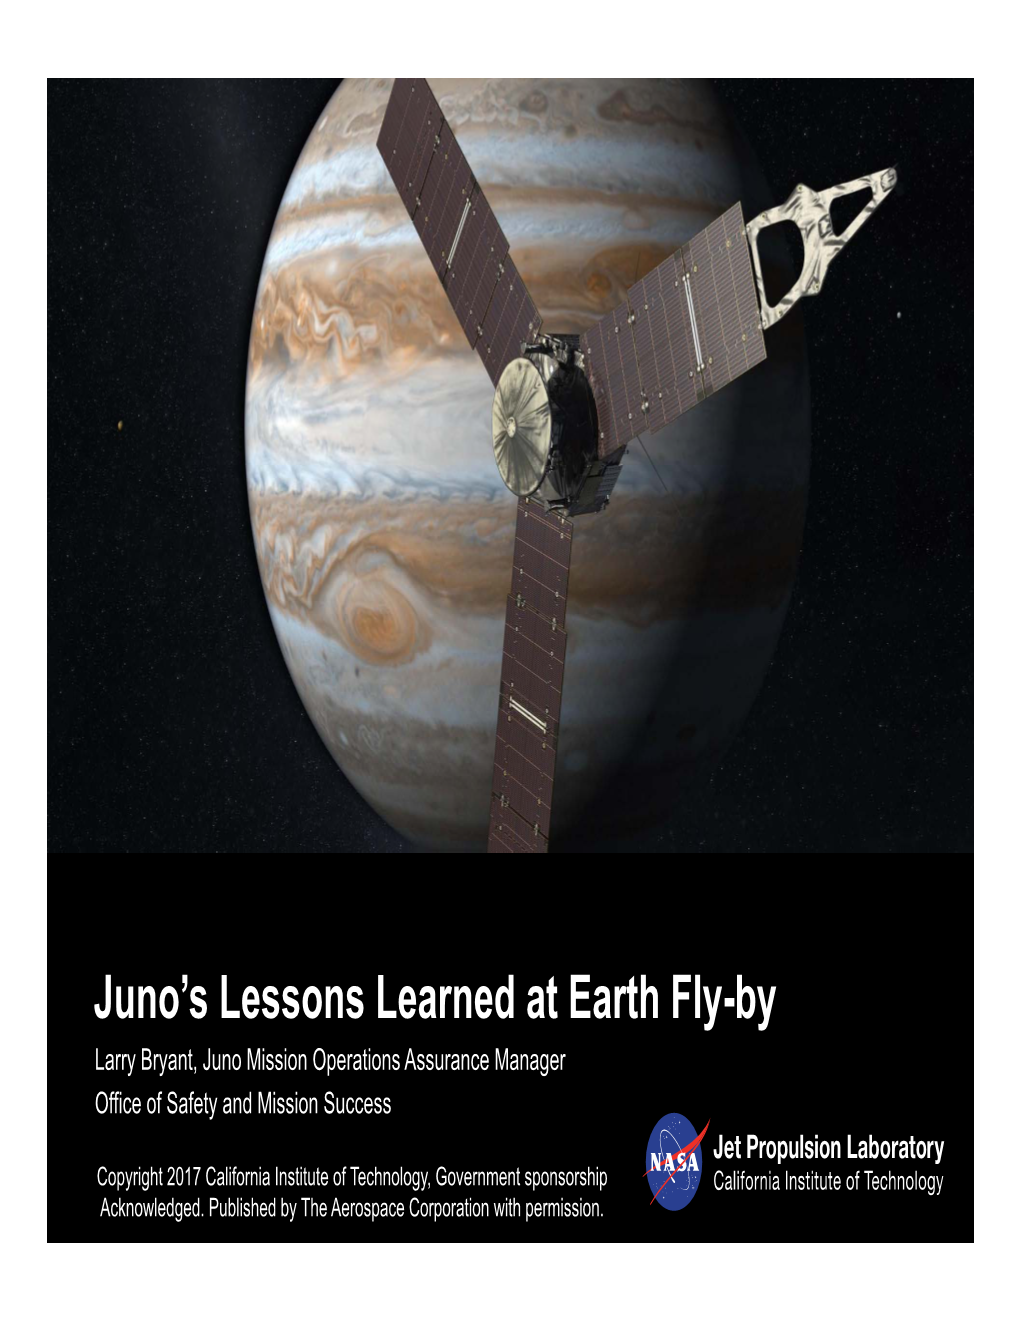 Juno's Lessons Learned at Earth Fly-By